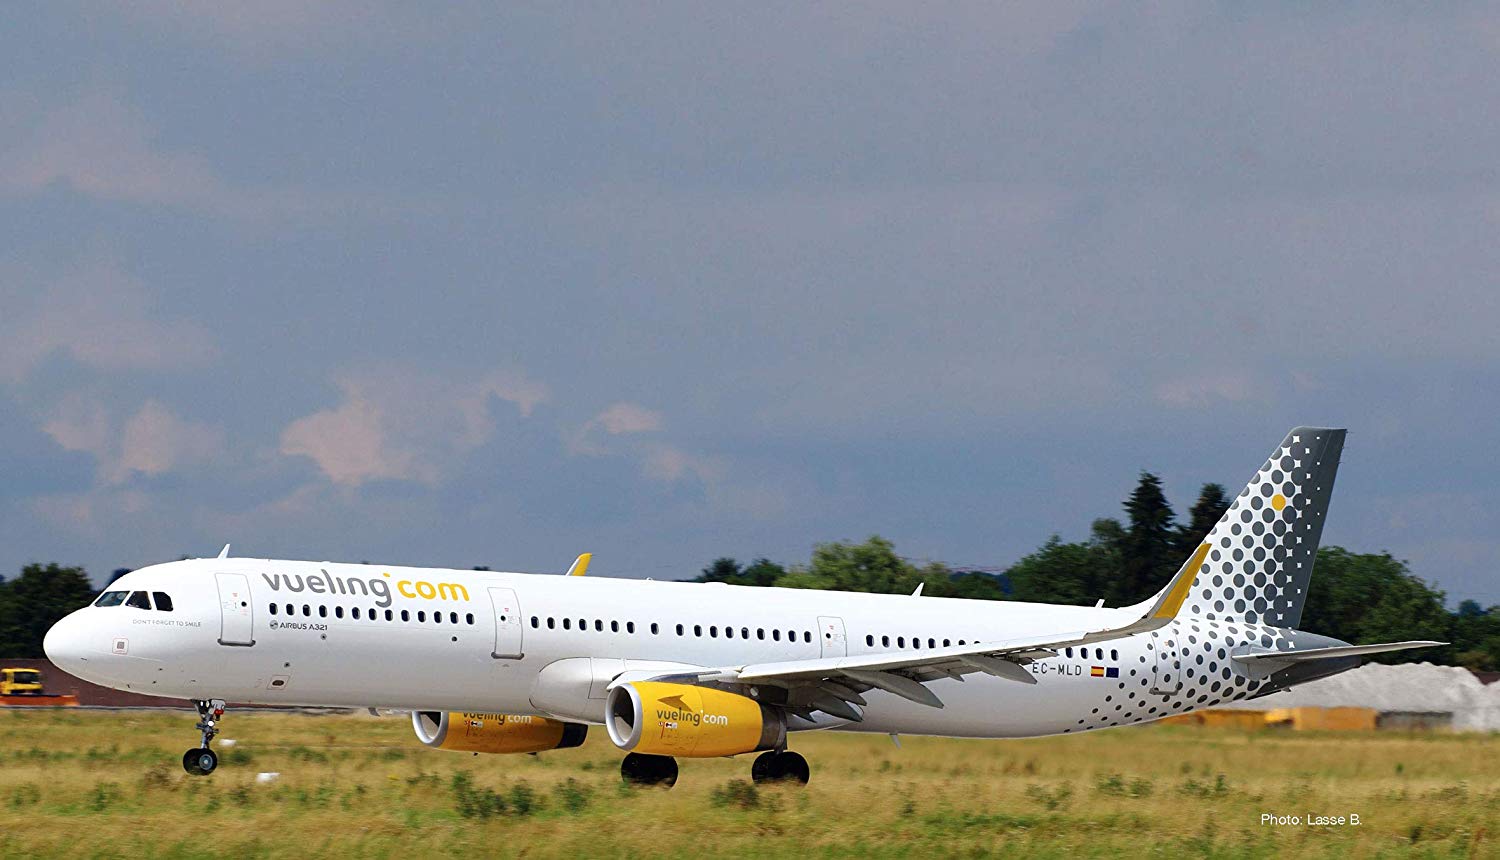 Herpa 533218 Vueling Airbus A321 Multi-Coloured